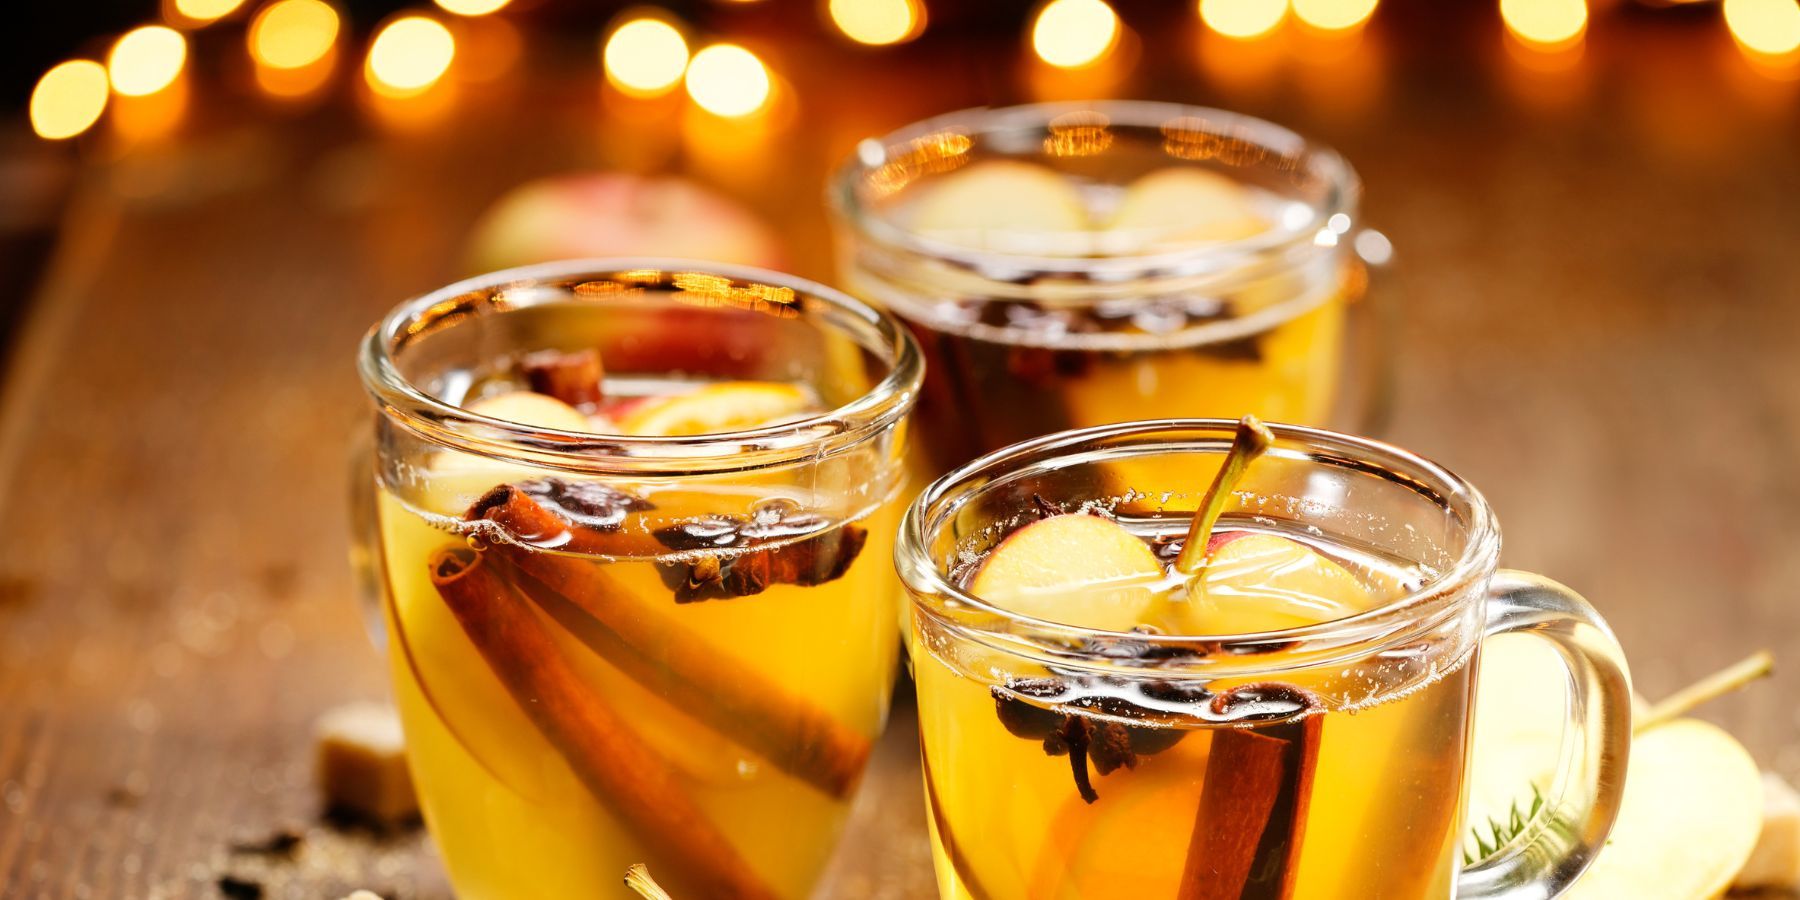 14-astonishing-facts-about-autumn-spiced-rum-cider